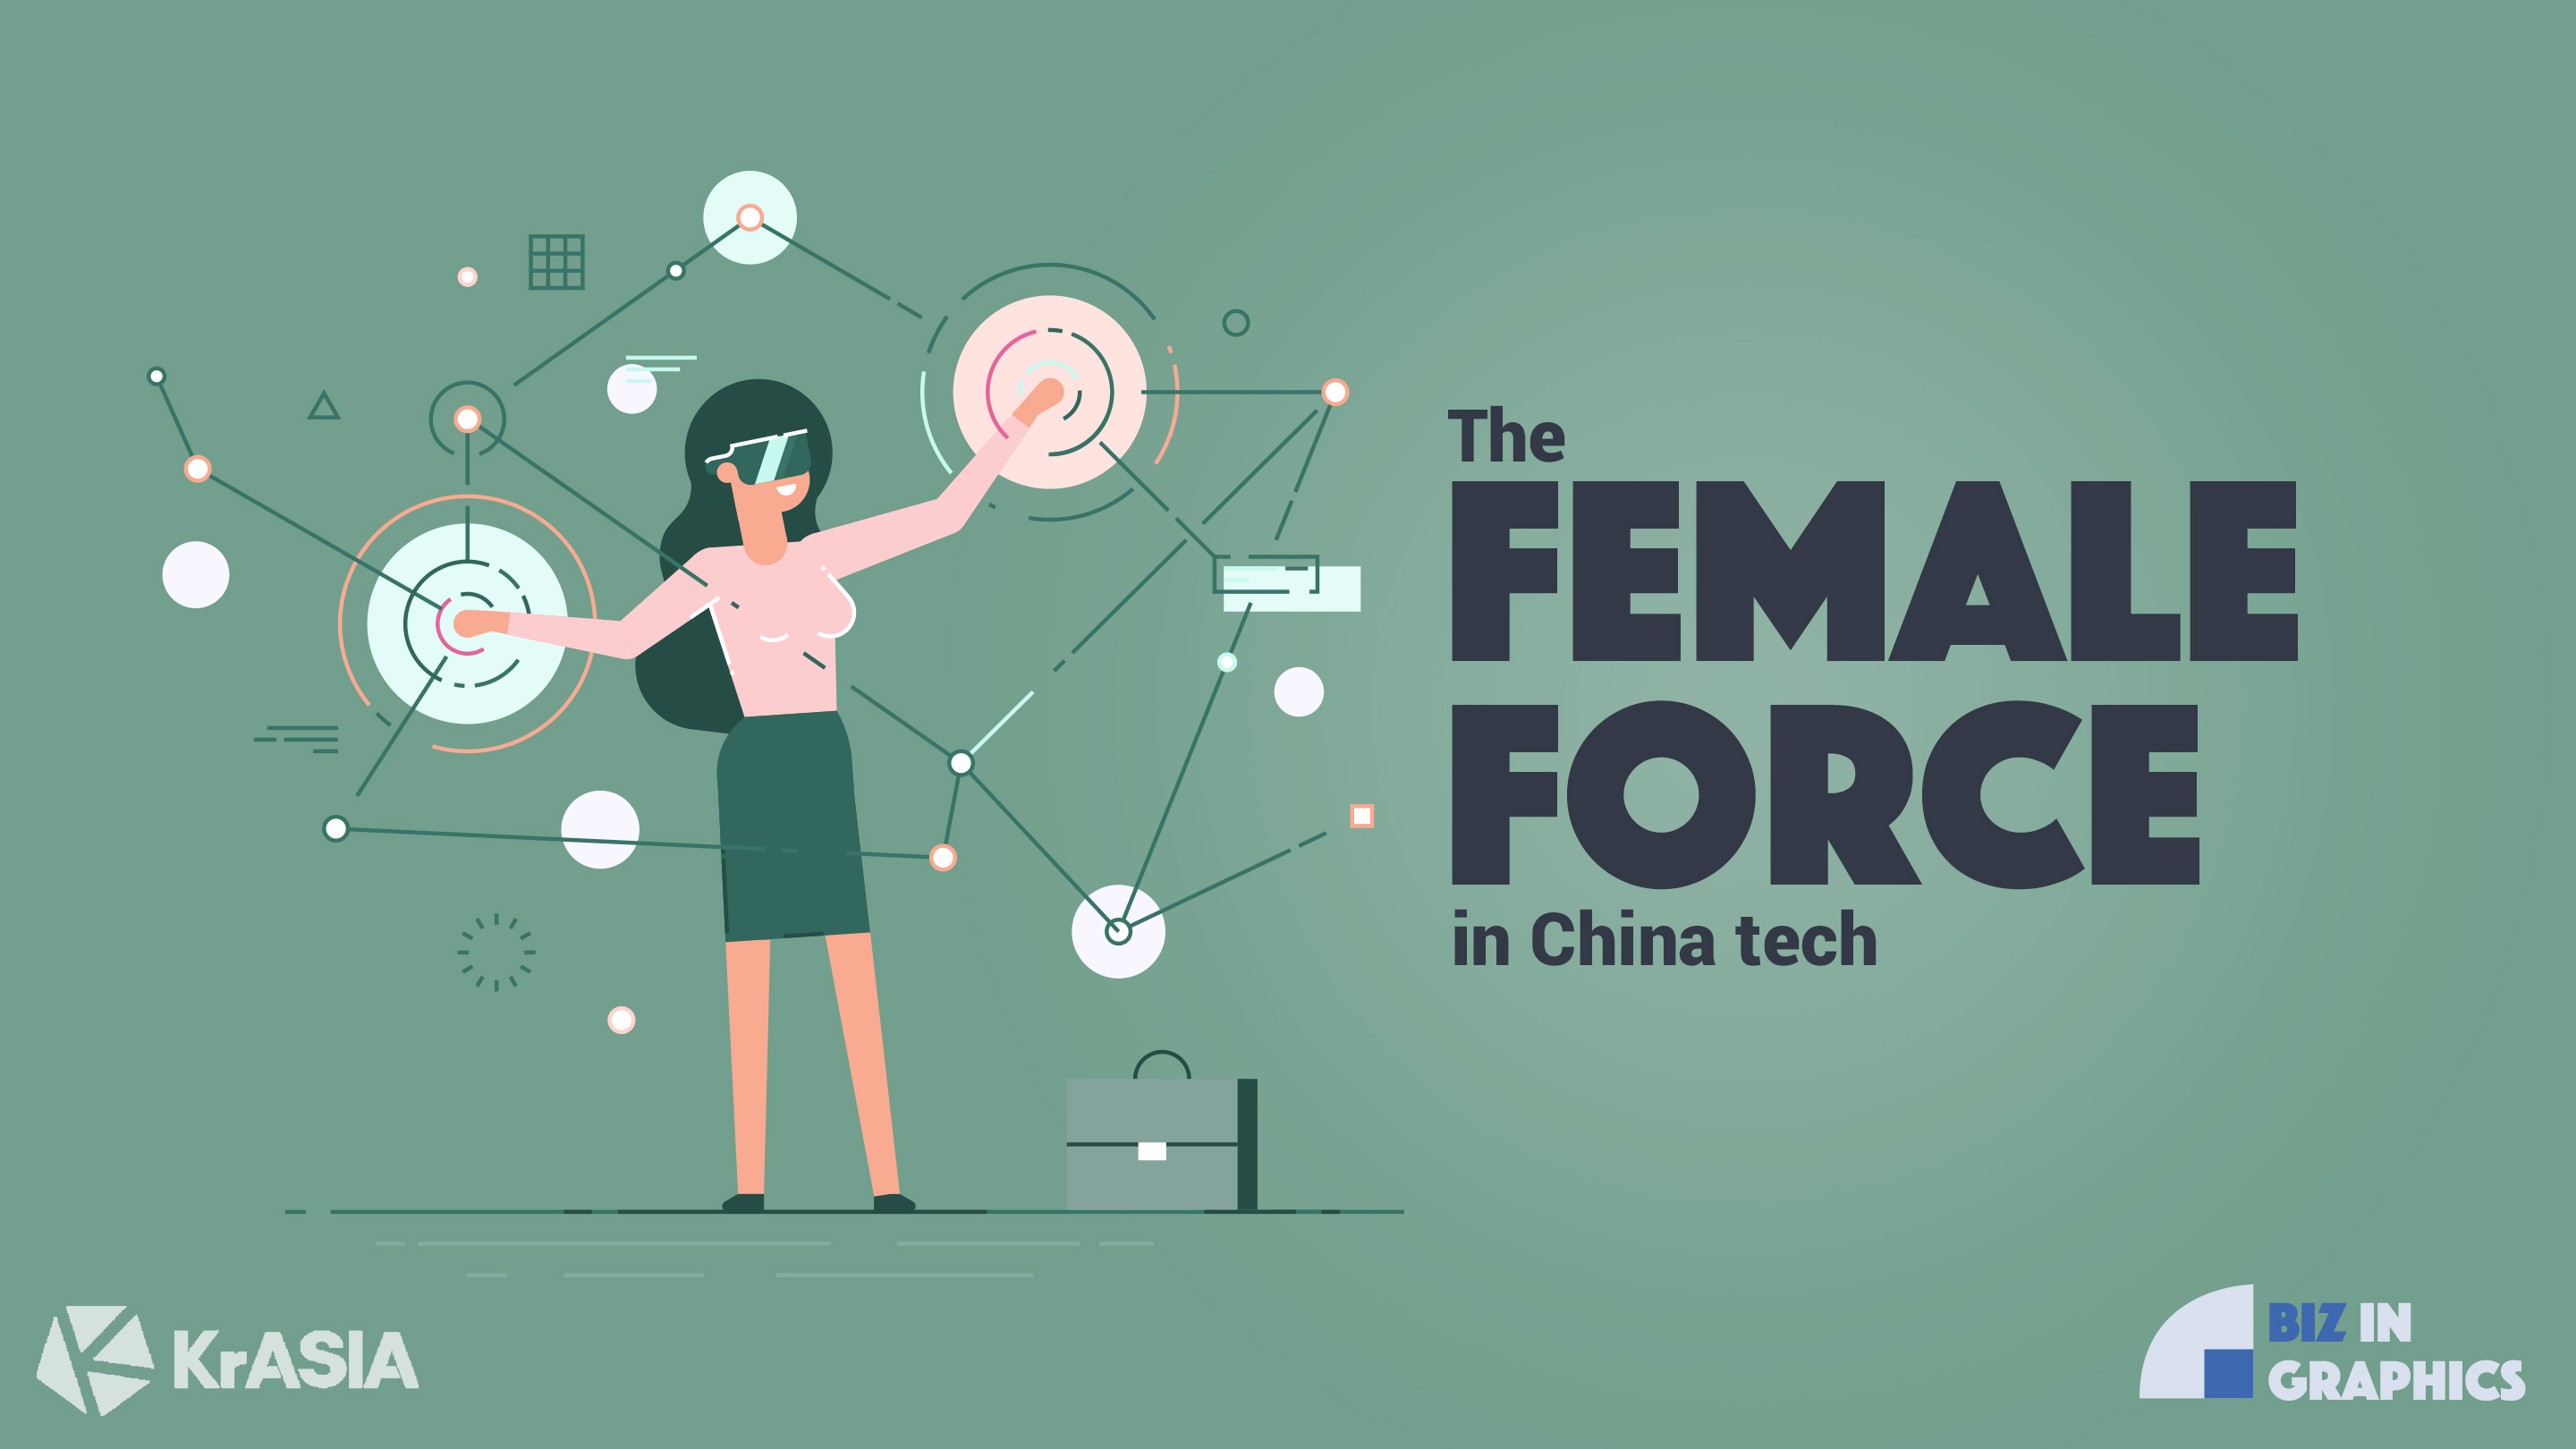 BIZ in GRAPHICS | Chinese women’s unique contribution to the country’s tech ecosystem